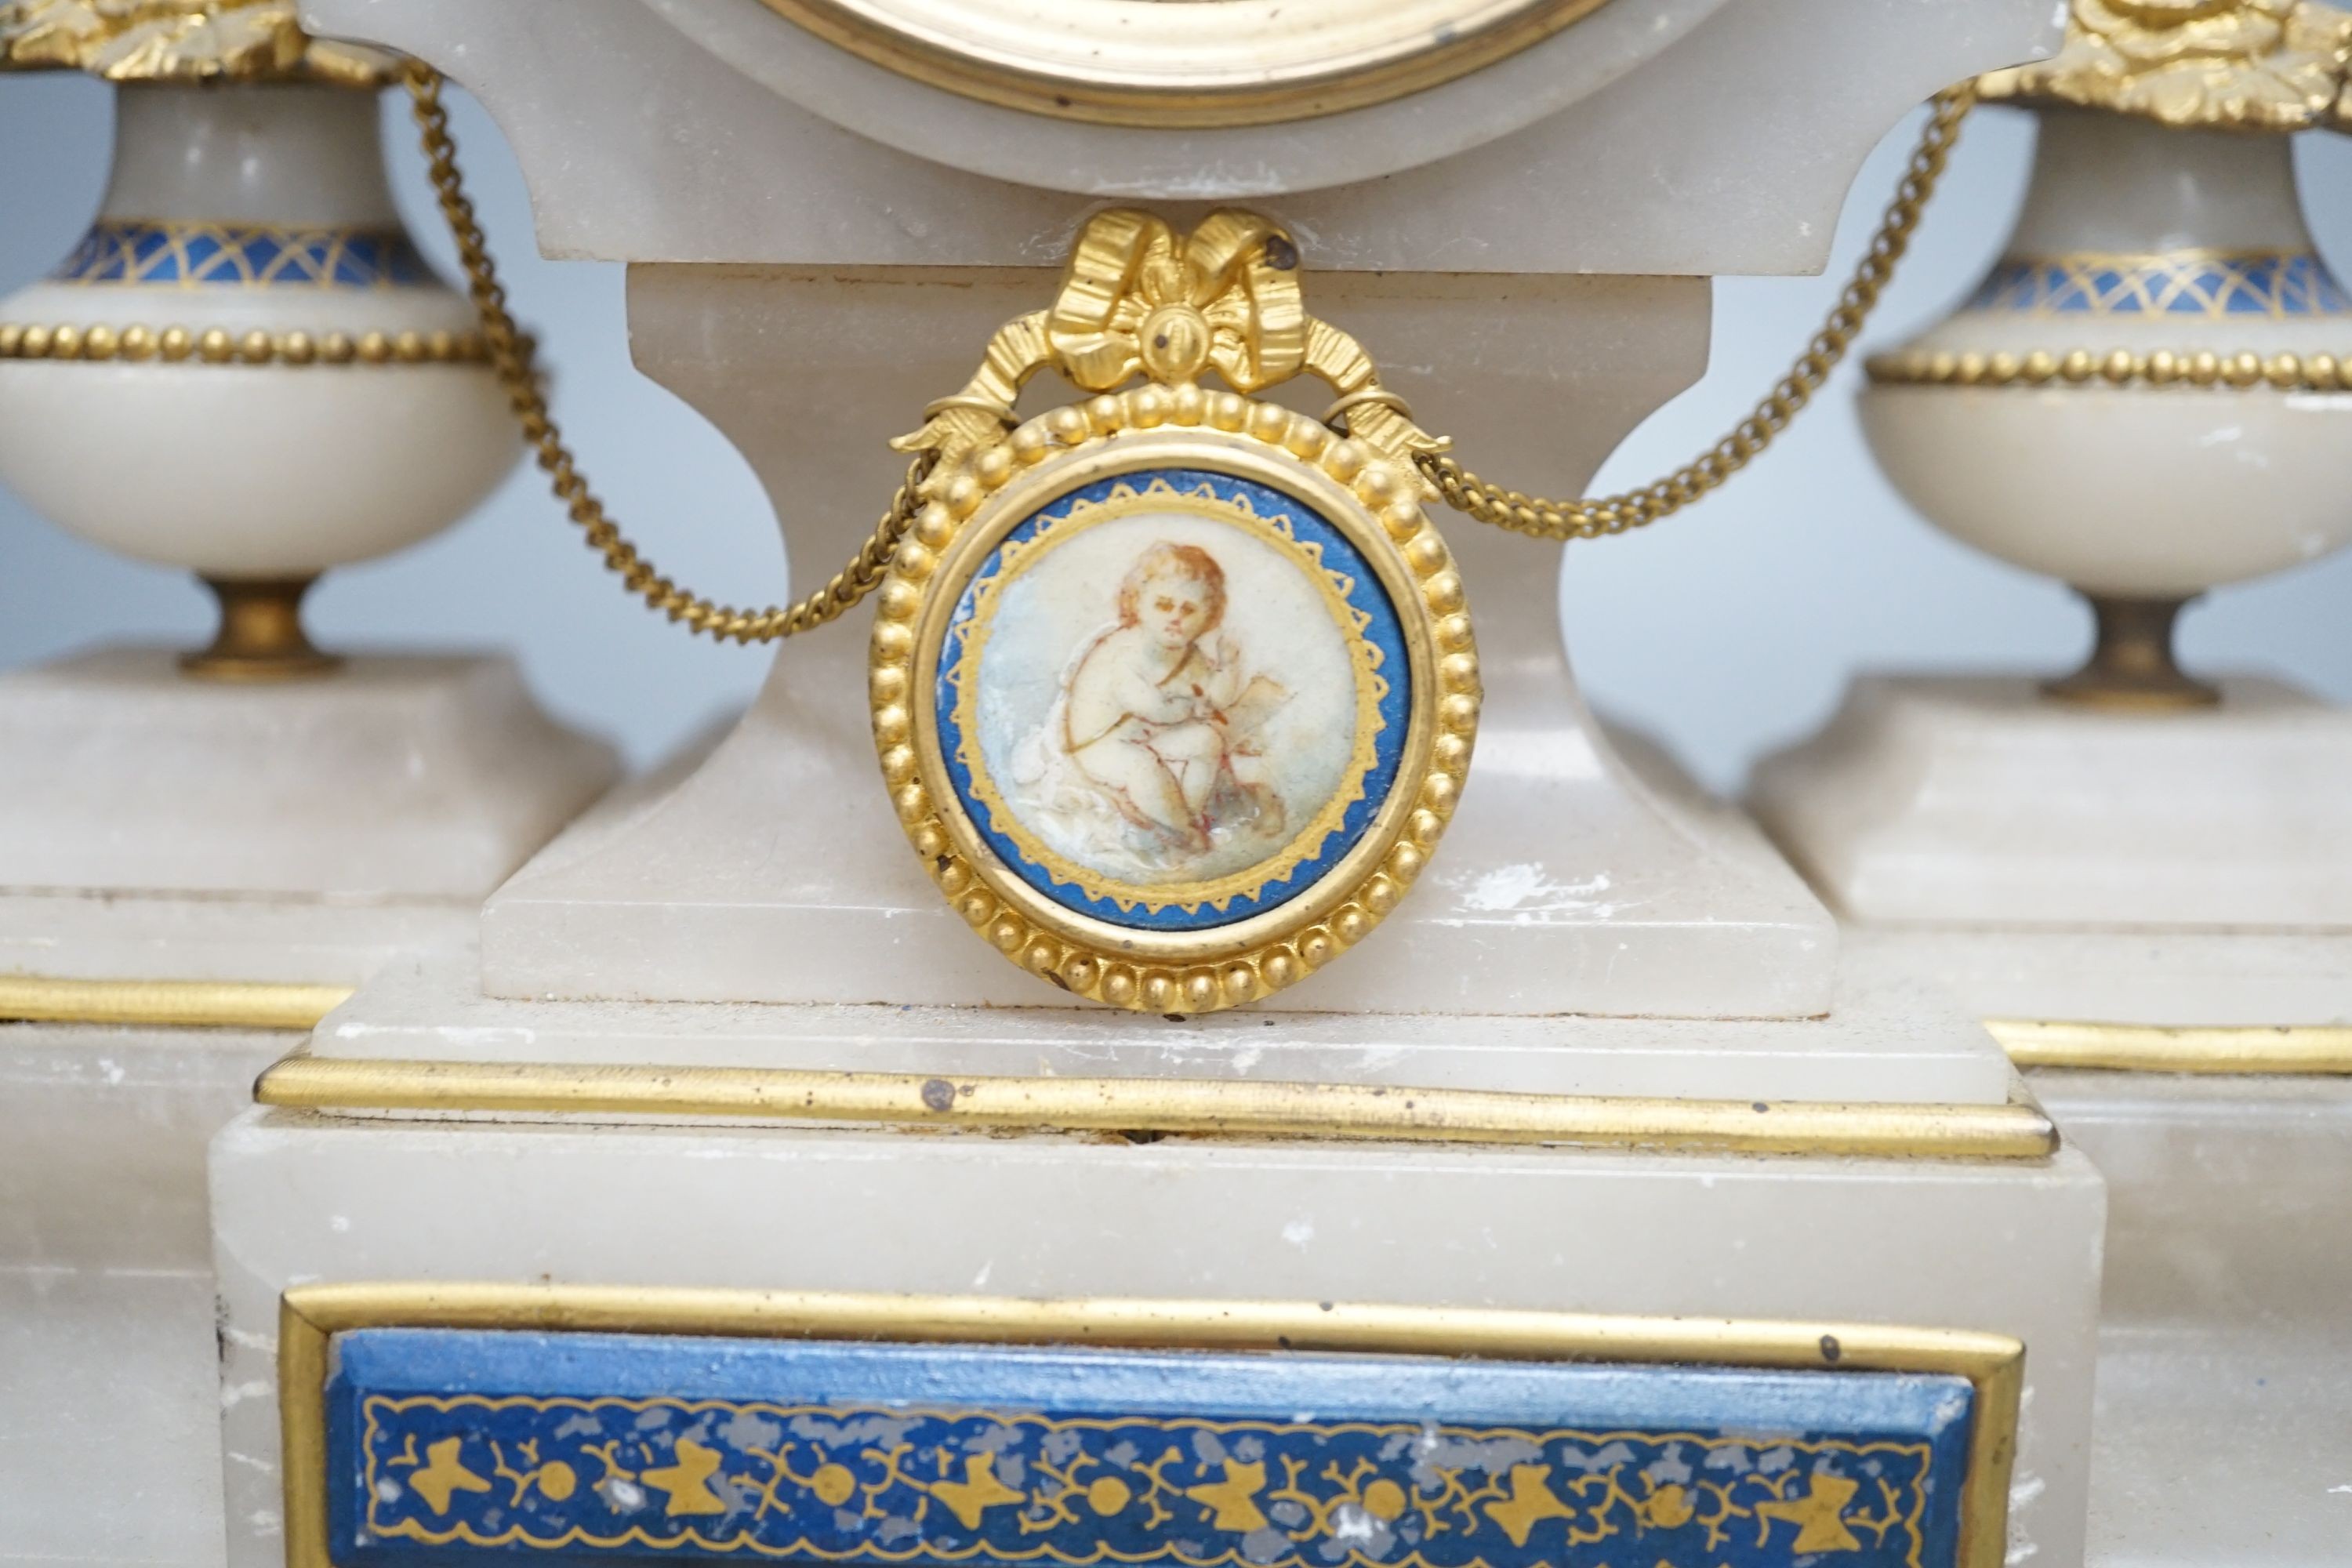 A late 19th century French alabaster and ormolu mounted mantel clock with key and pendulum - 39cm tall